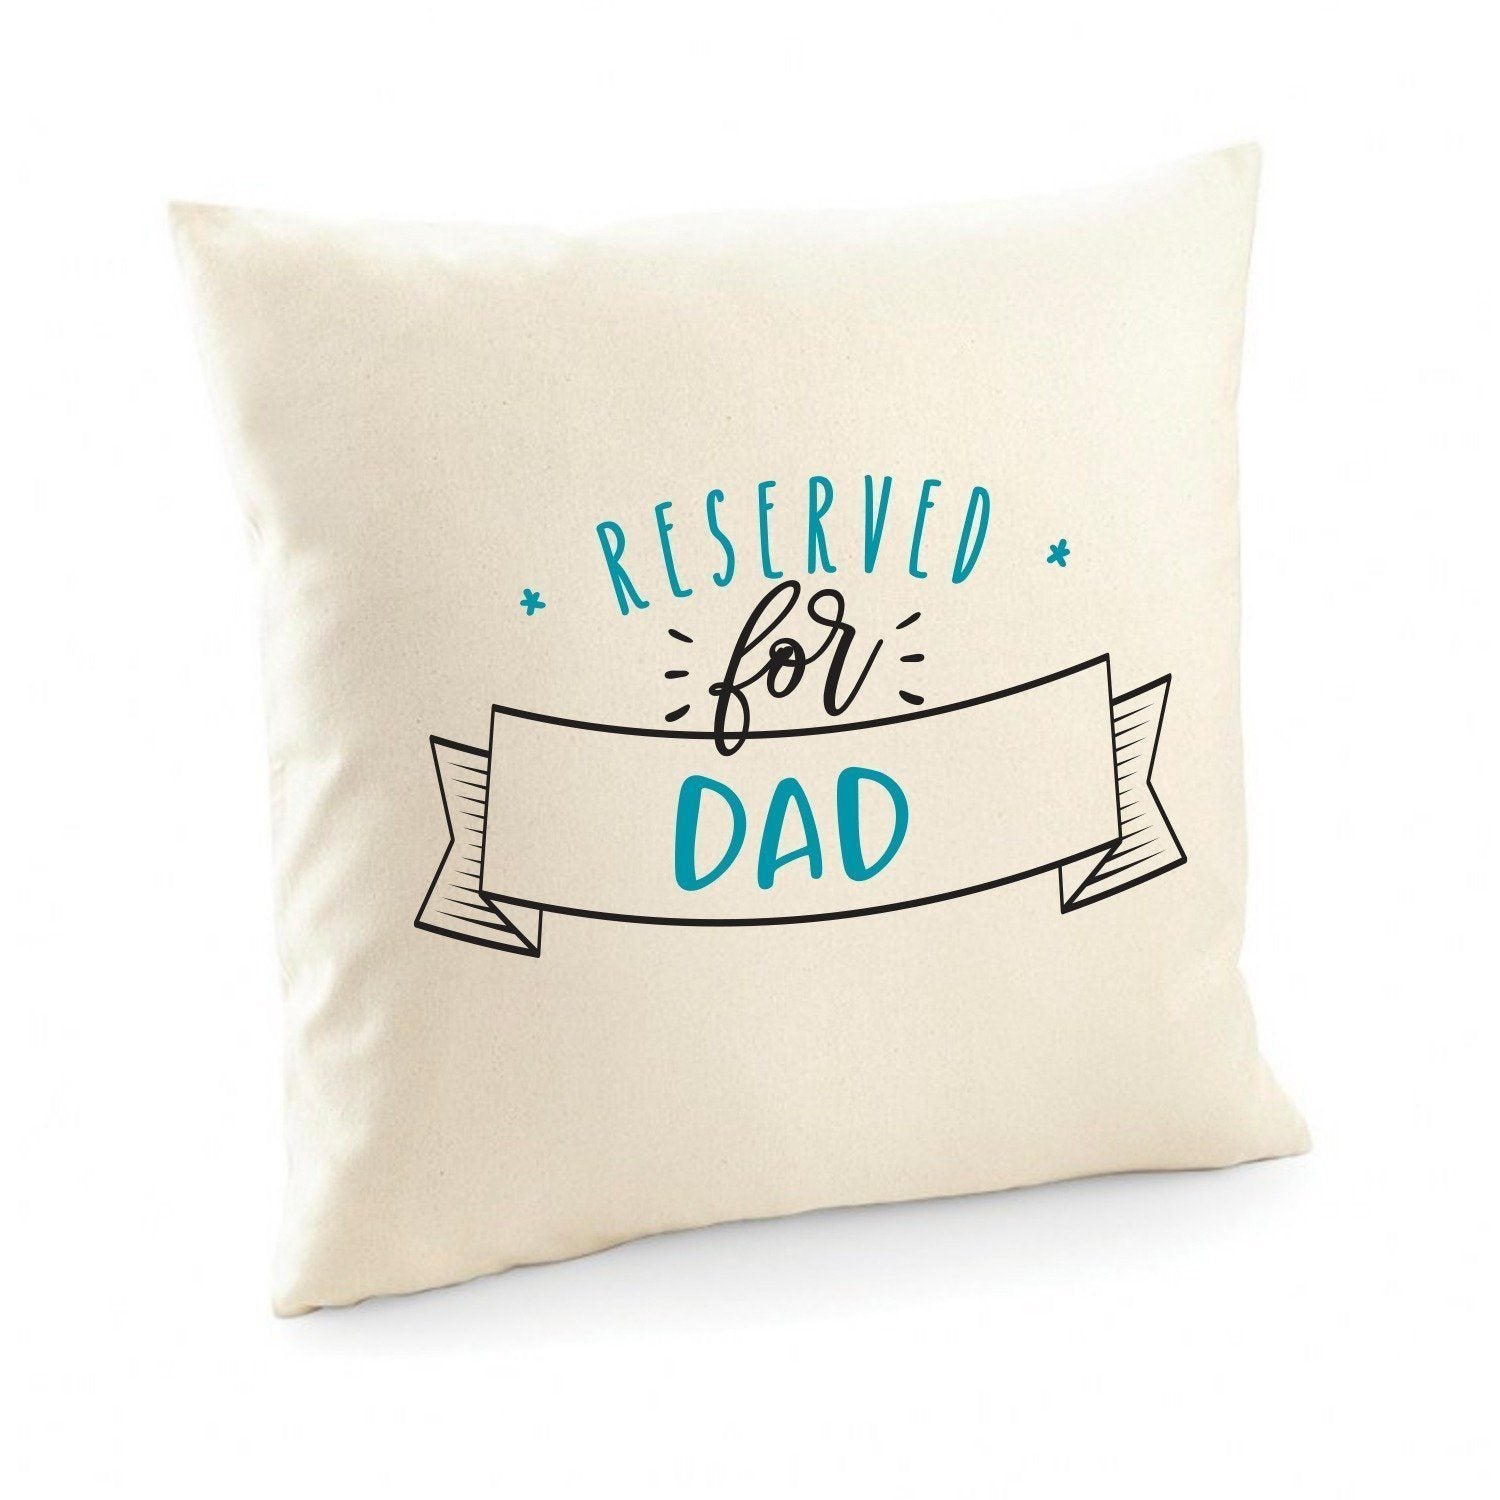 Reserved for dad cushion cover, Gift for dad, Father's Day gift